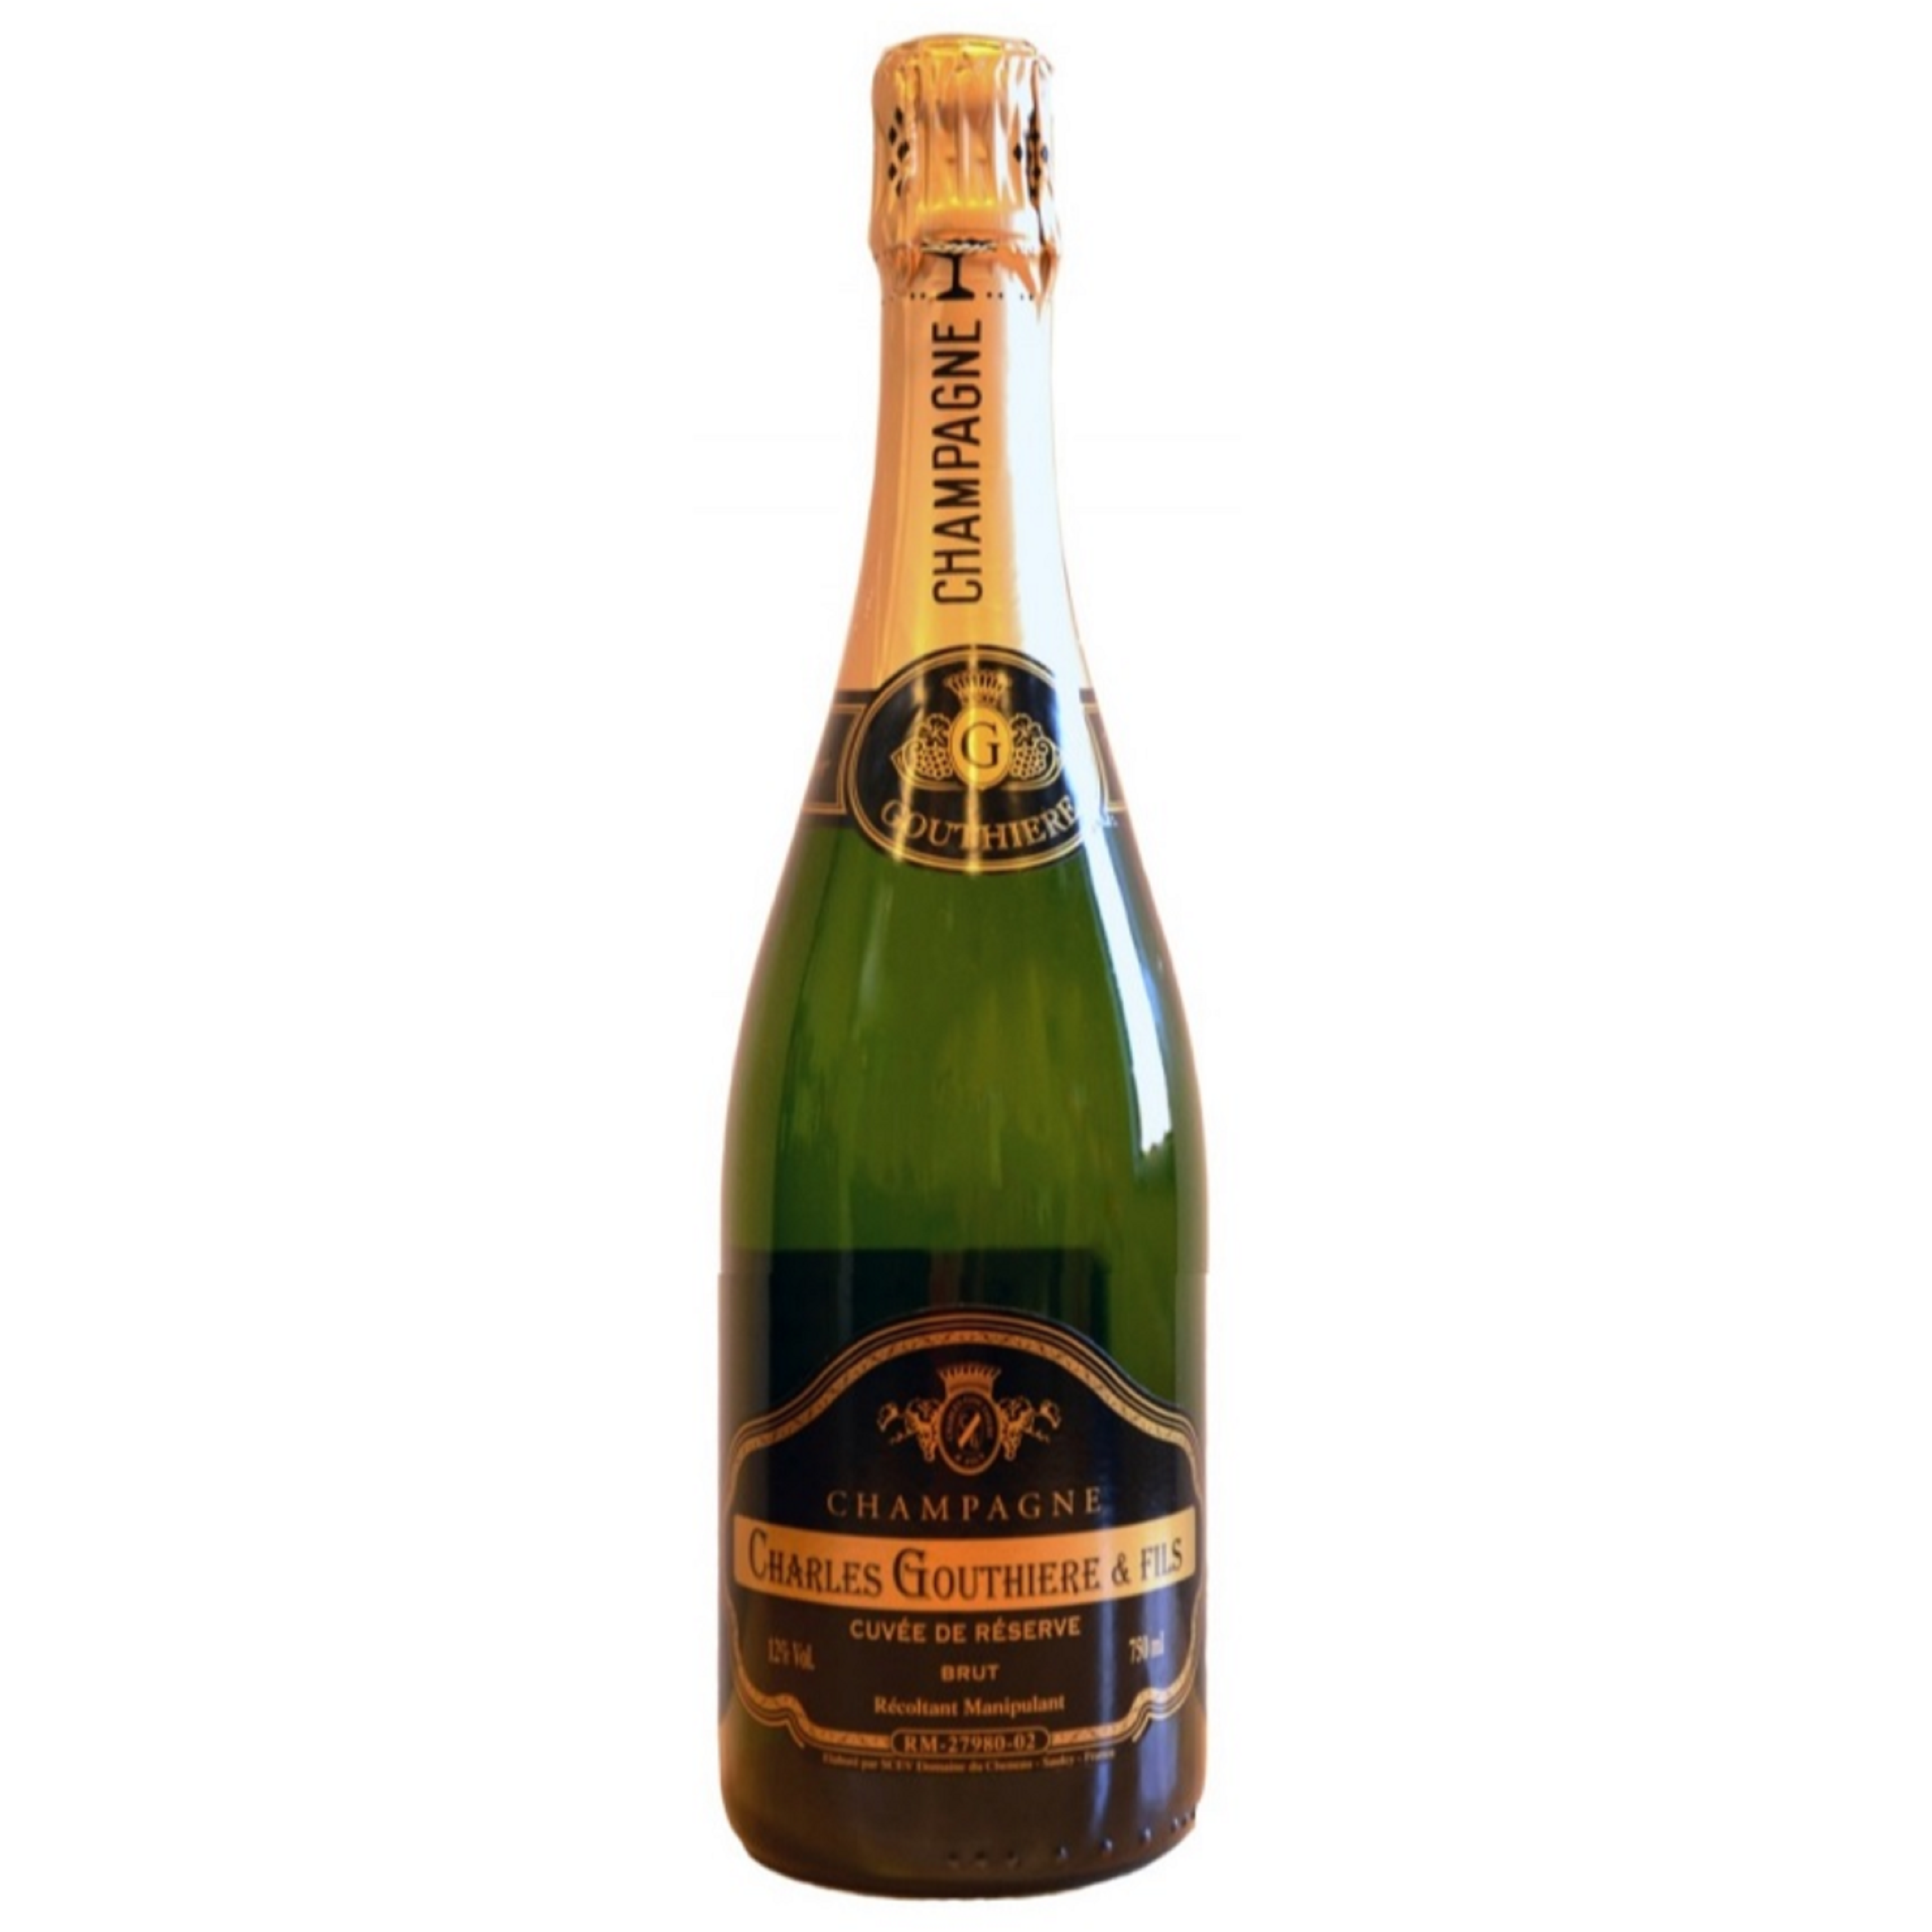 Champagne Gouthiere Brut Reserve